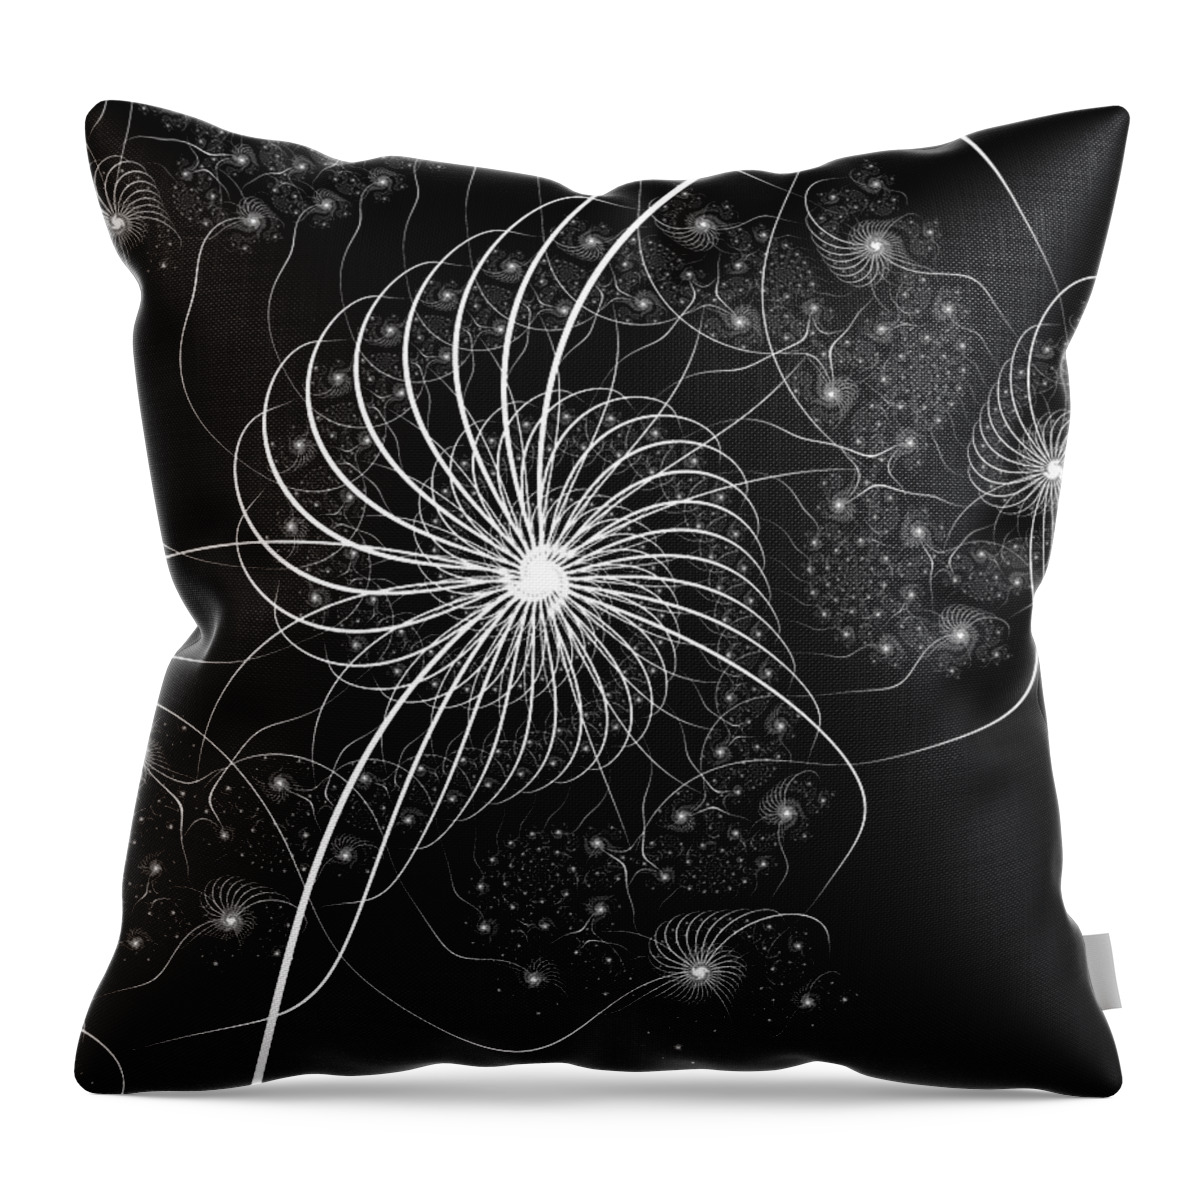 Vic Eberly Throw Pillow featuring the digital art The Night Has a Thousand Eyes by Vic Eberly